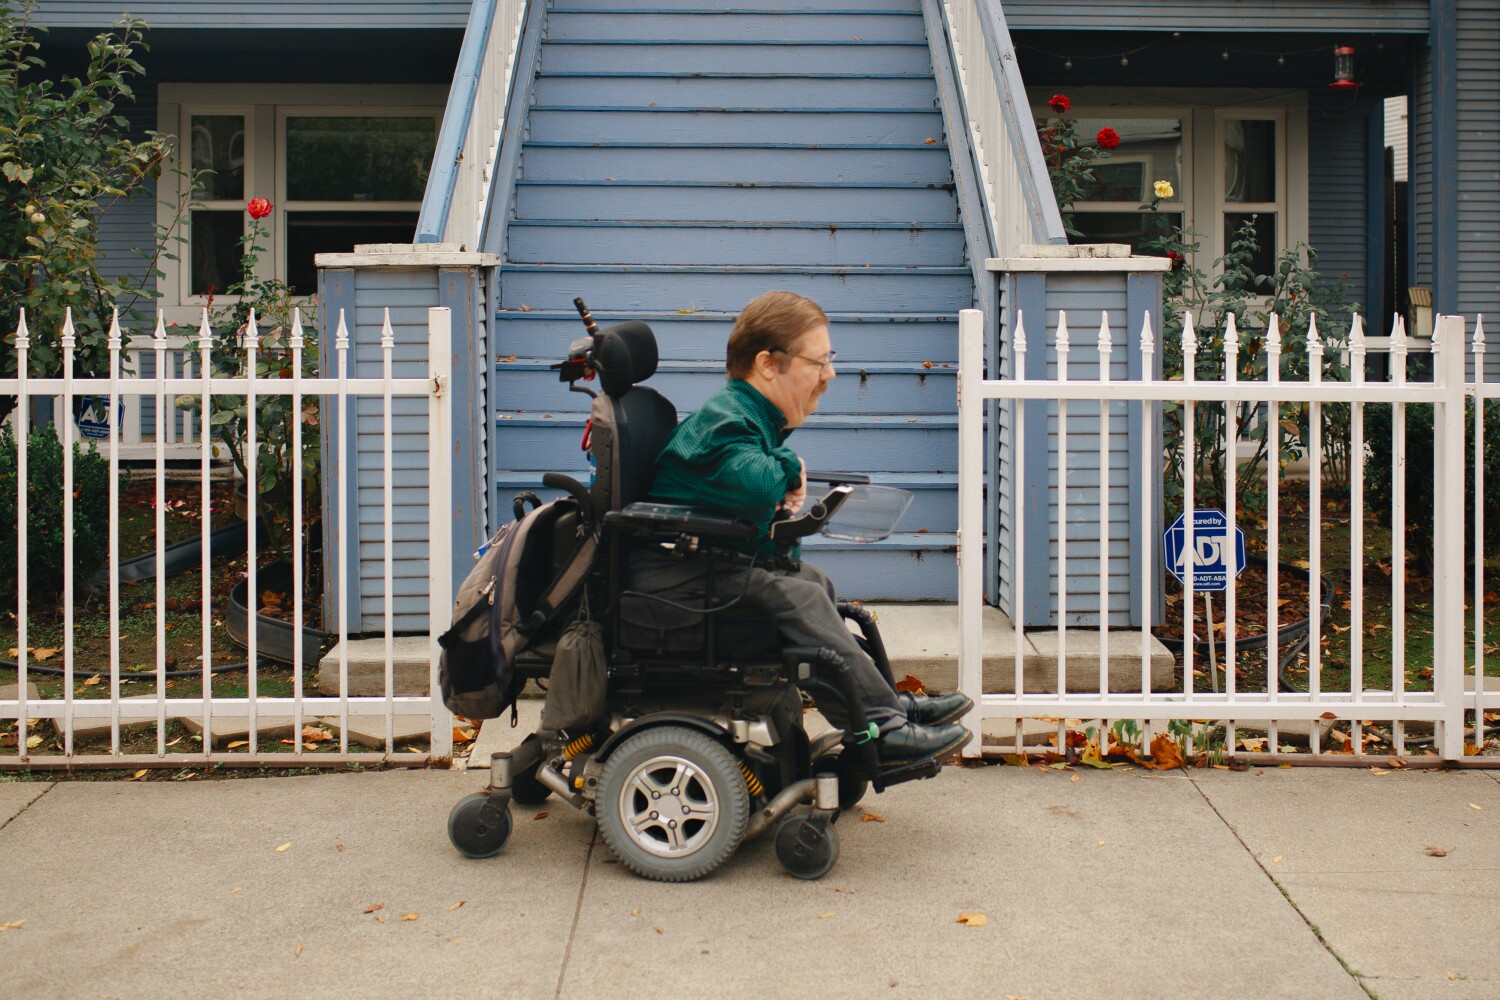 Wheelchair users can face hefty costs not covered by insurance